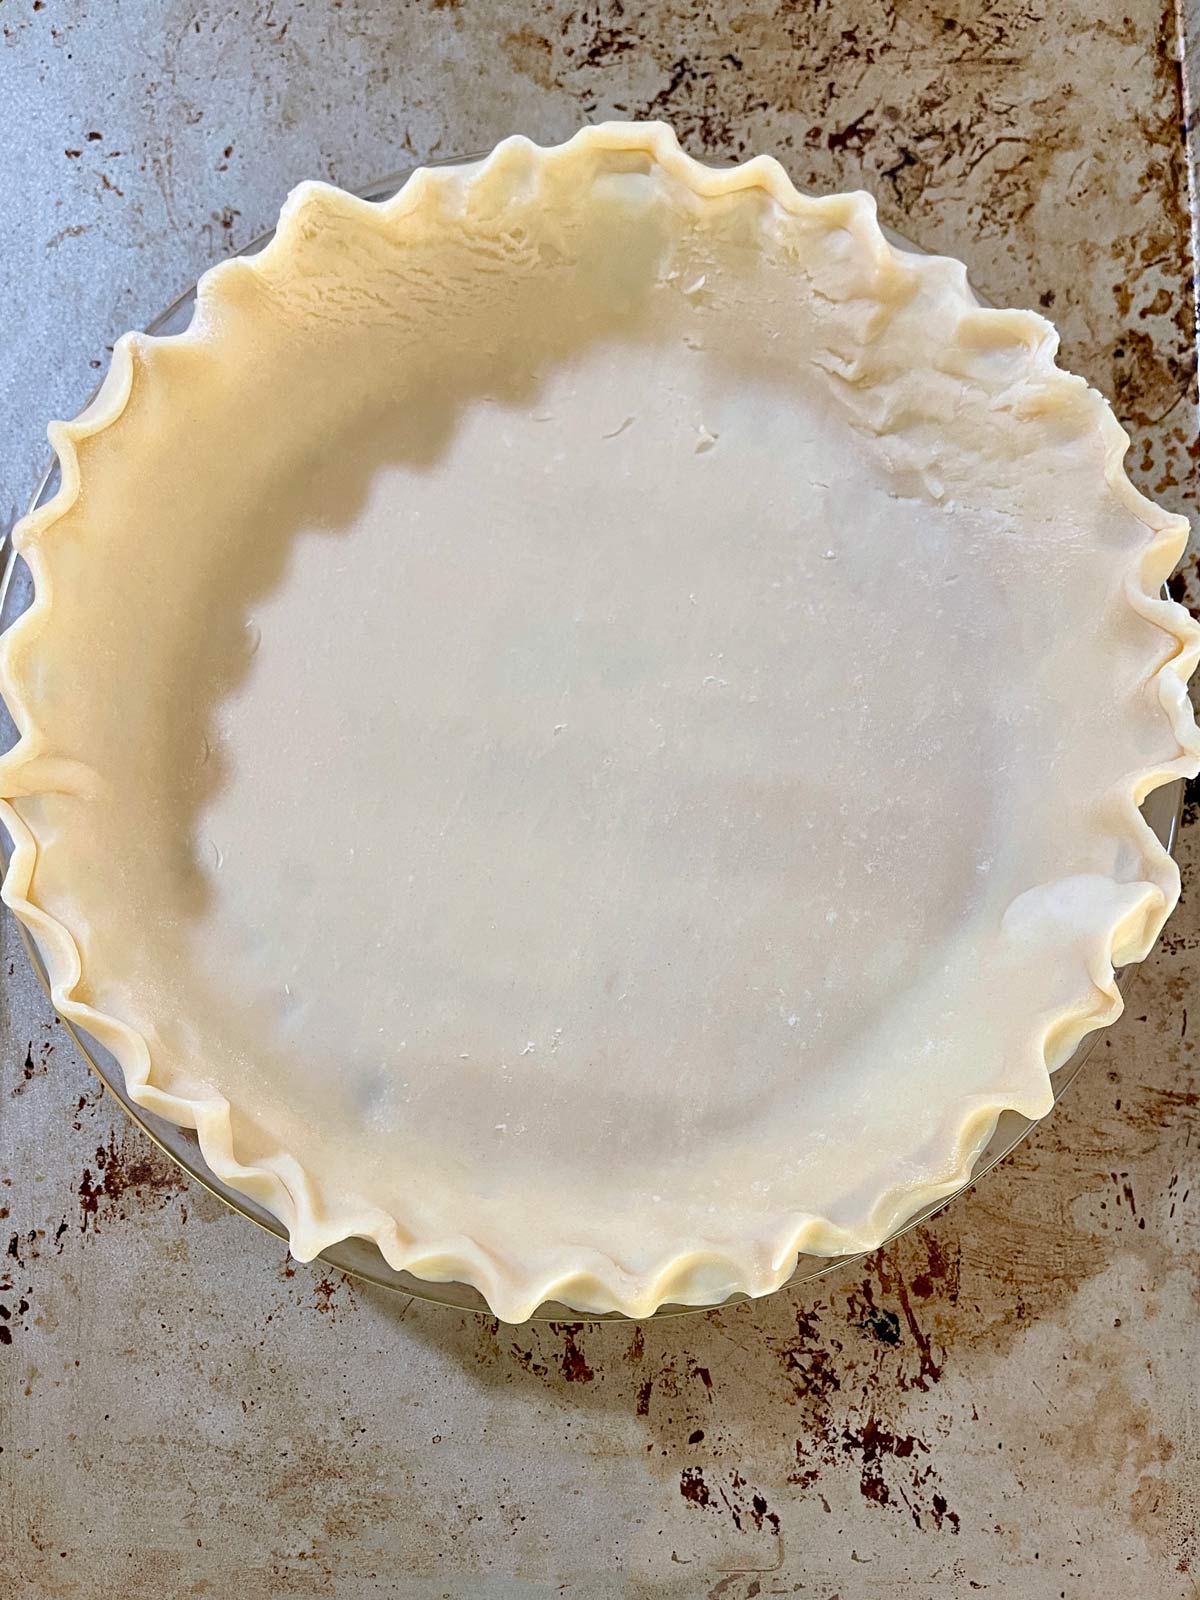 Pie crust unbaked in pie pan with fluted edsge.